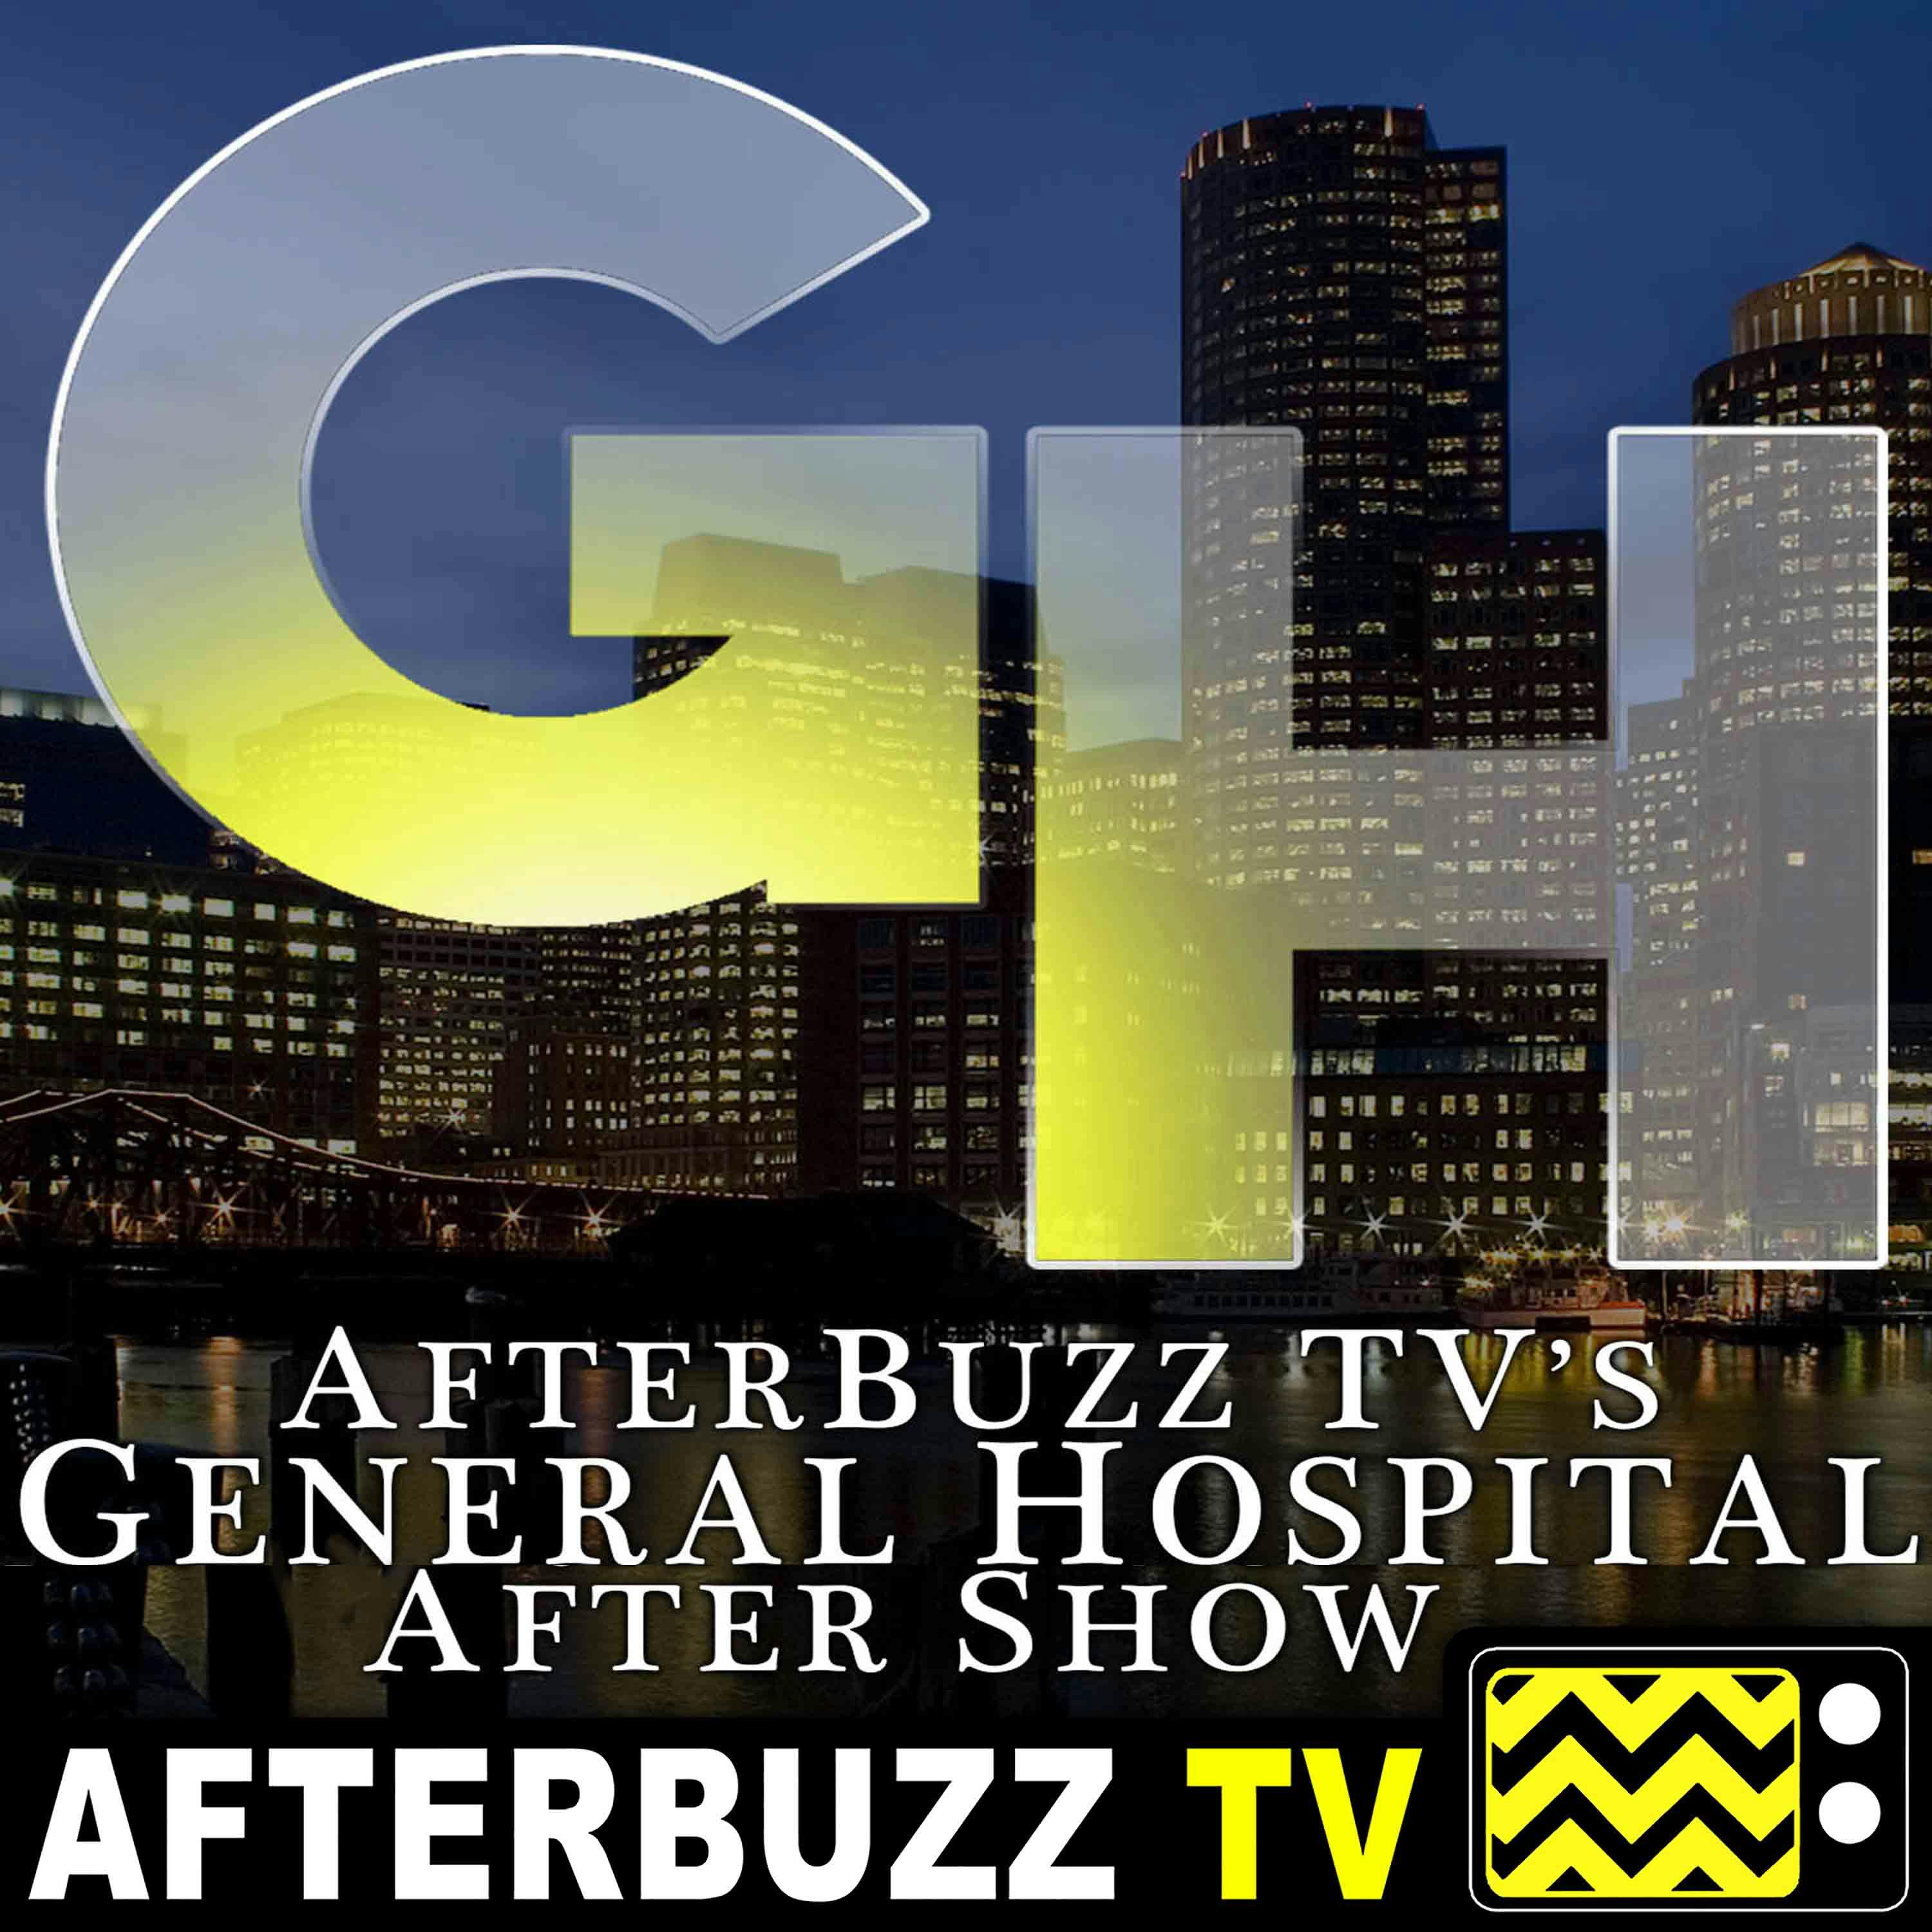 Review Of General Hospital for February 4th - February 8th, 2019